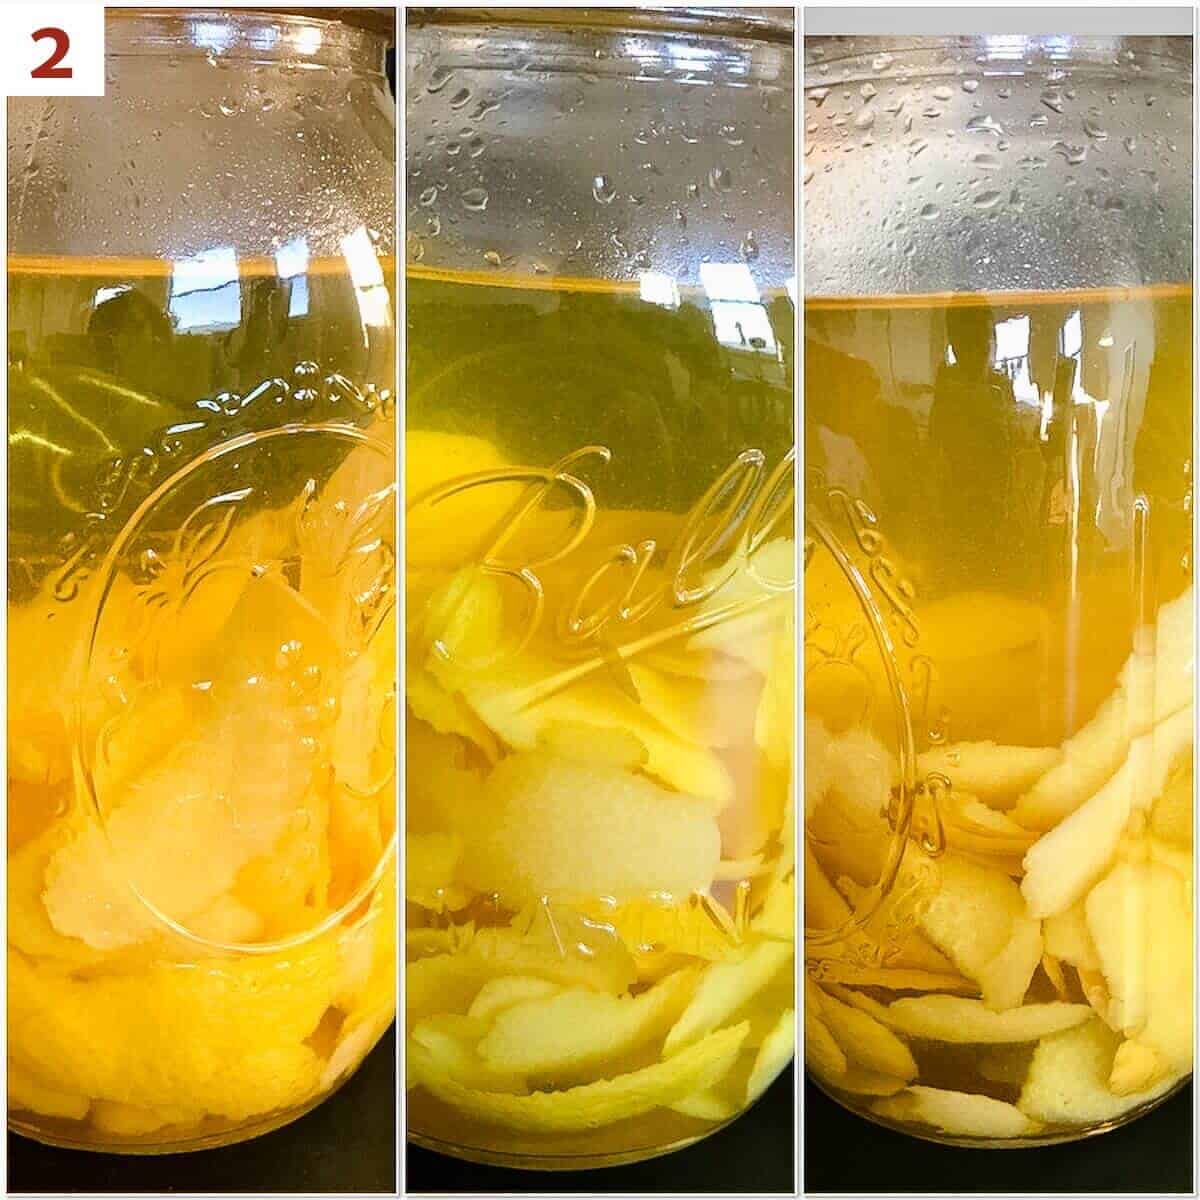 Collage of the limoncello infusion on day 2, day 5, and day 14.